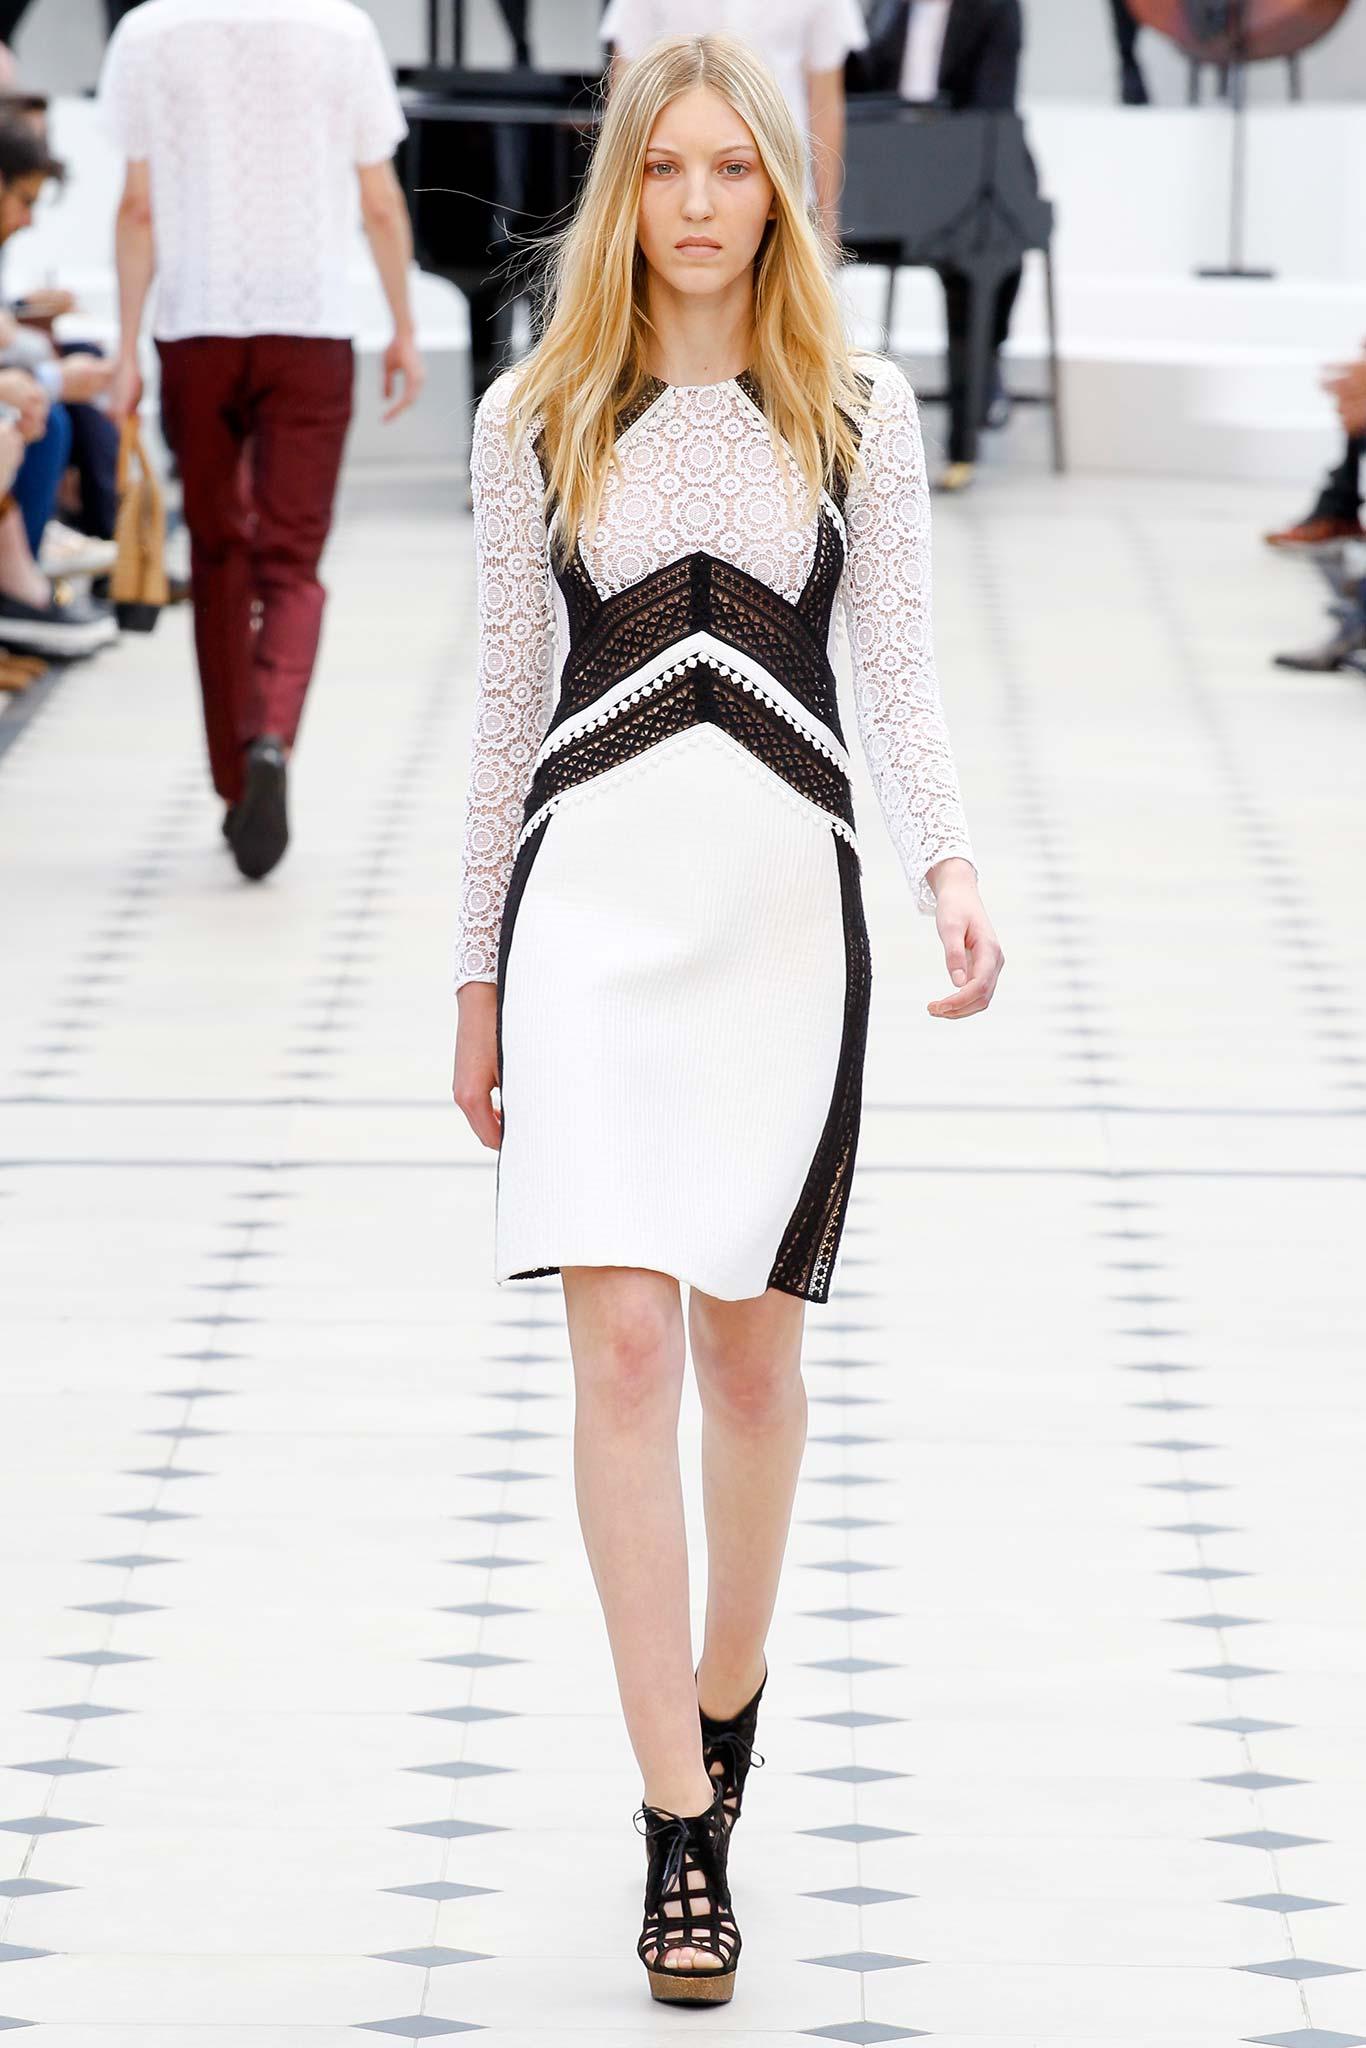 Burberry Prorsum Resort 2016 White & Black Patterned Shift Mini Dress by Christopher Bailey shown during the menswear 2016 spring presentation. Features Lace Trim Embellishment, Long Sleeve with Crew Neck, Concealed Zip Closure at Back. Made in